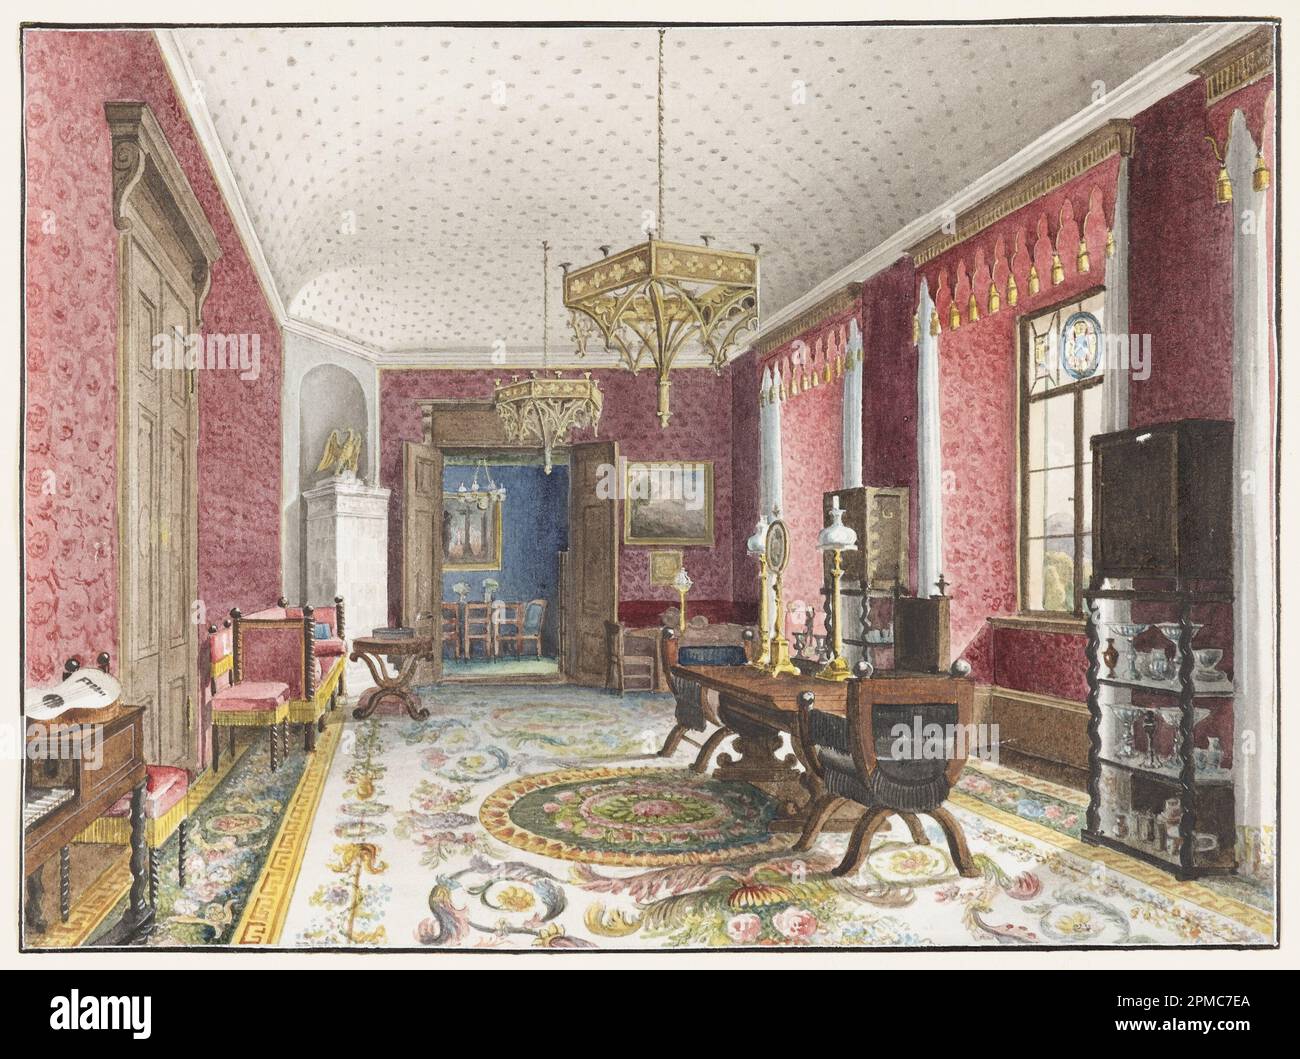 Drawing, The Red Room, Schloss Fischbach; Friedrich Wilhelm Klose; brush and watercolor, graphite on white wove paper; Frame H x W x D: 36.8 x 43.2 x 2 cm (14 1/2 in. x 17 in. x 13/16 in.) Mat: 35.6 x 45.7 cm (14 x 18 in.) 16.5 x 22.4 cm (6 1/2 x 8 13/16 in.); Thaw Collection; 2007-27-38 Stock Photo